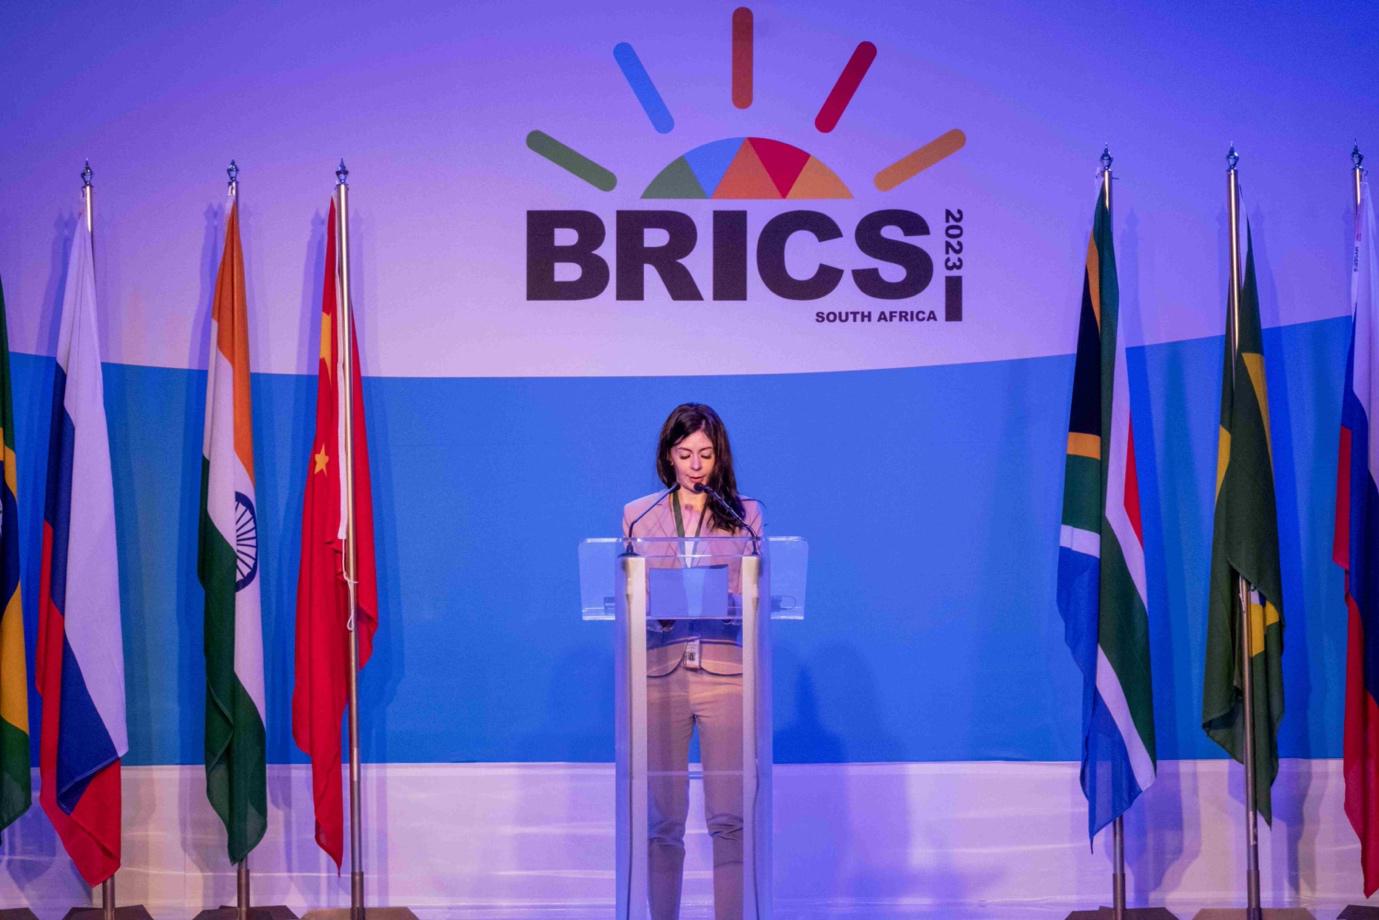 The future of science, technology and innovation among BRICS countries is bright.